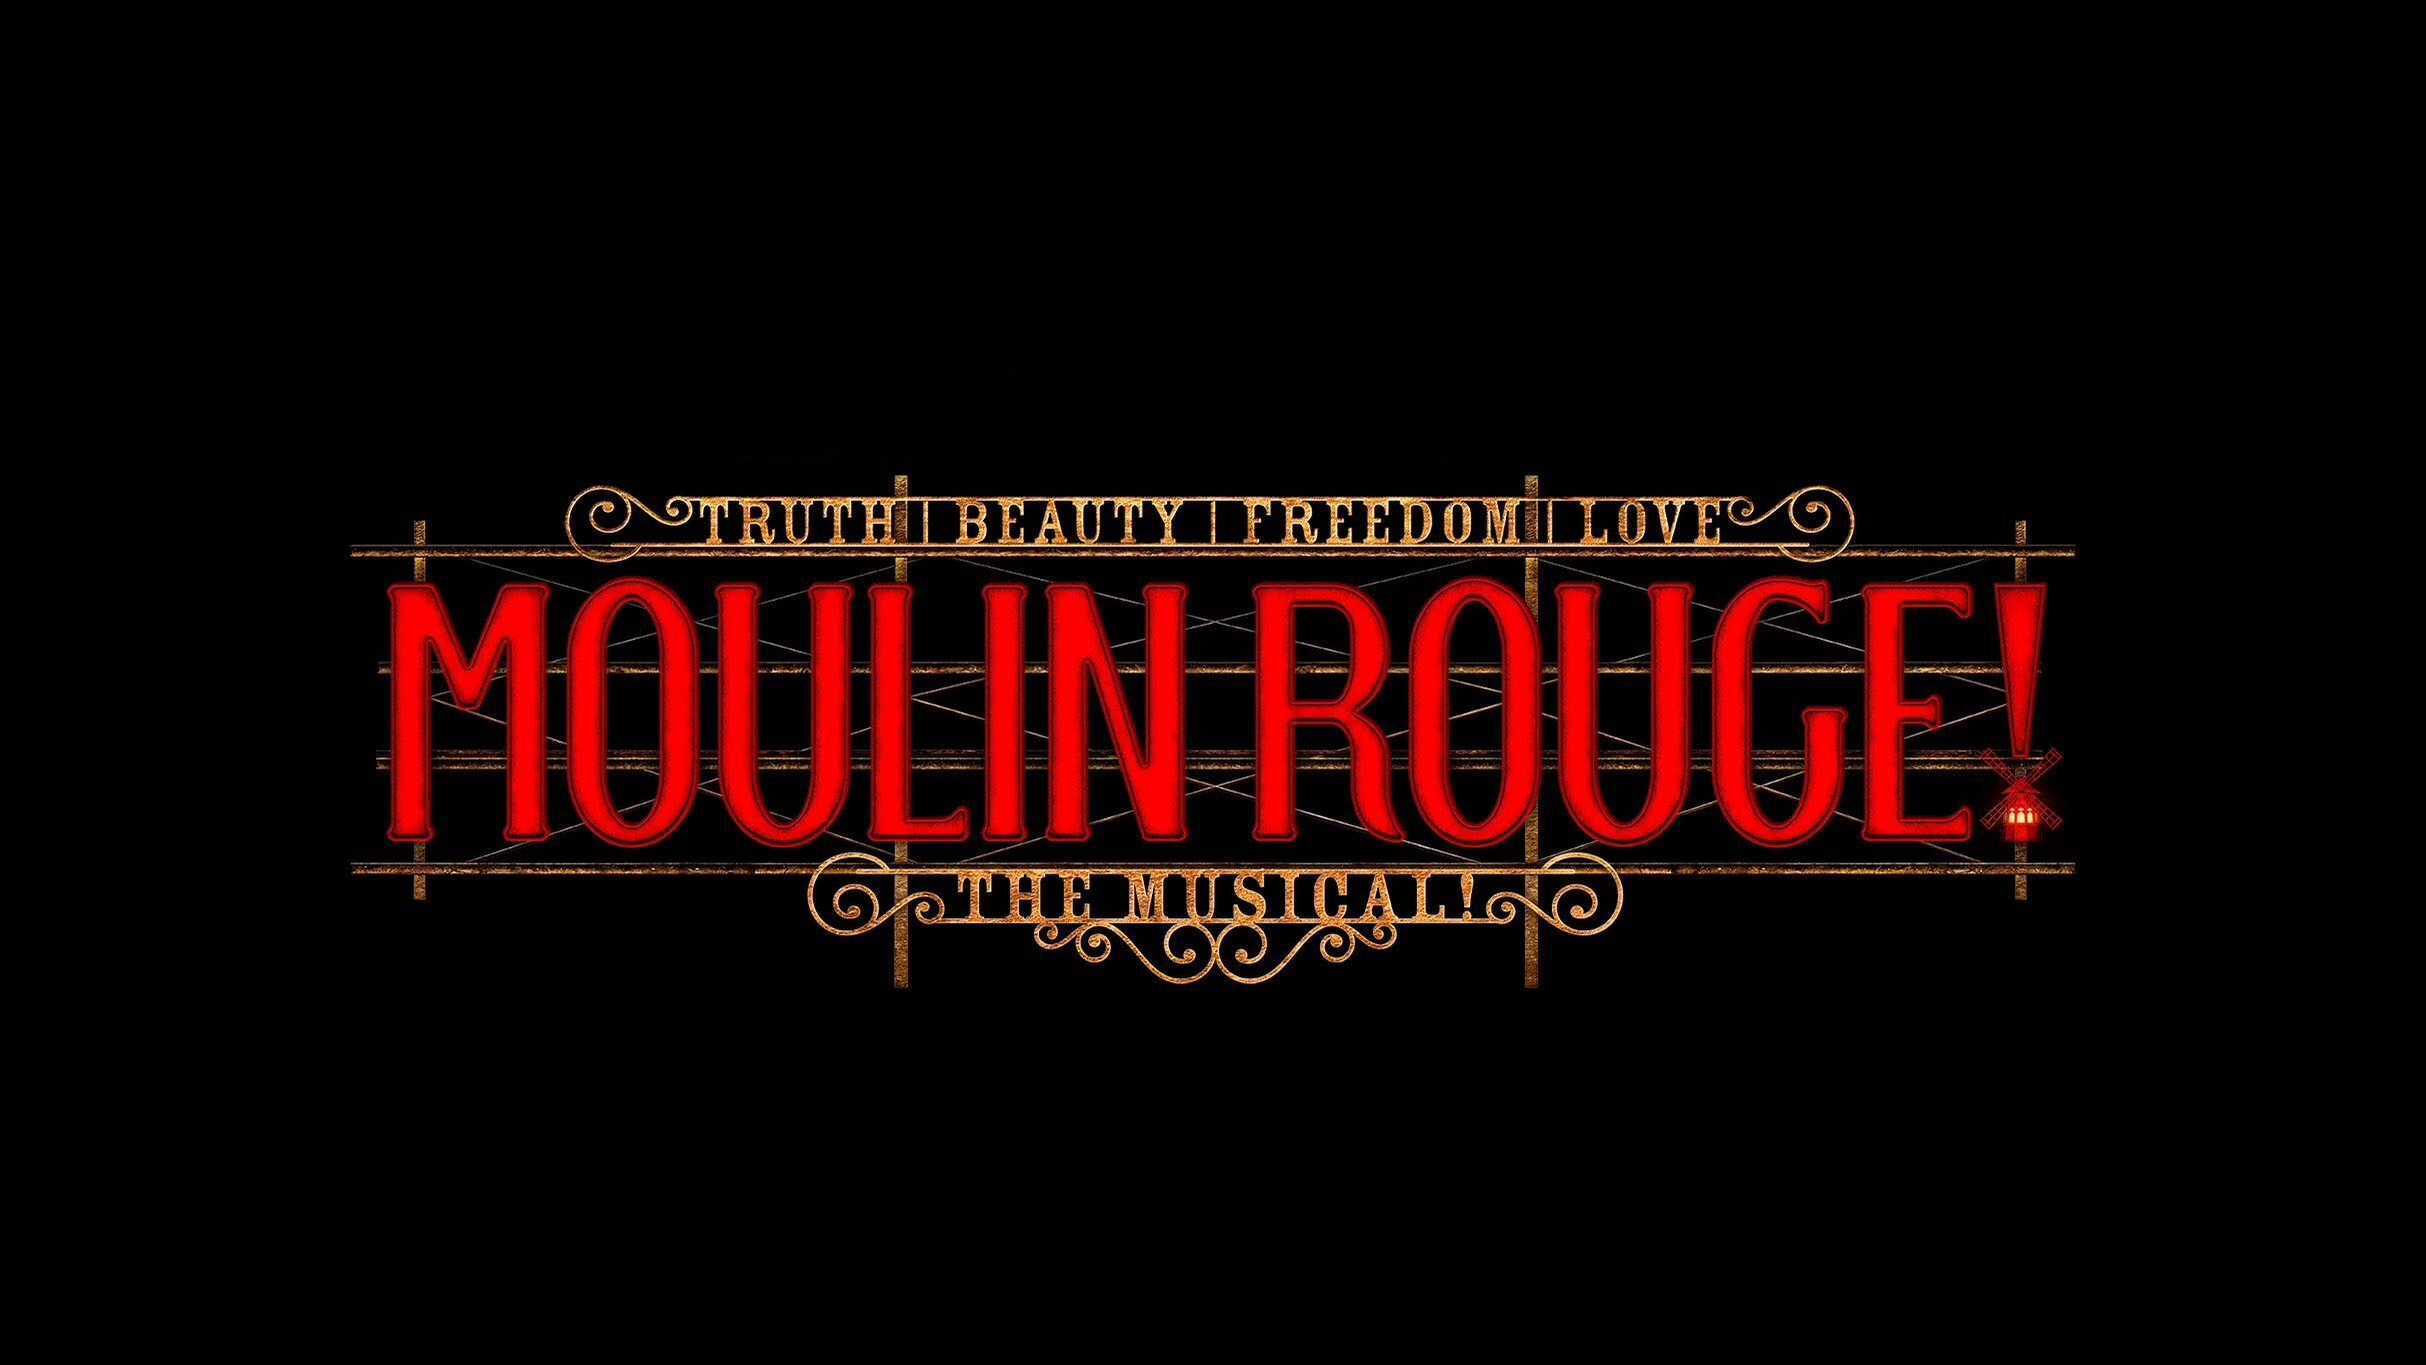 Moulin Rouge (Touring) in Kansas City promo photo for Social presale offer code